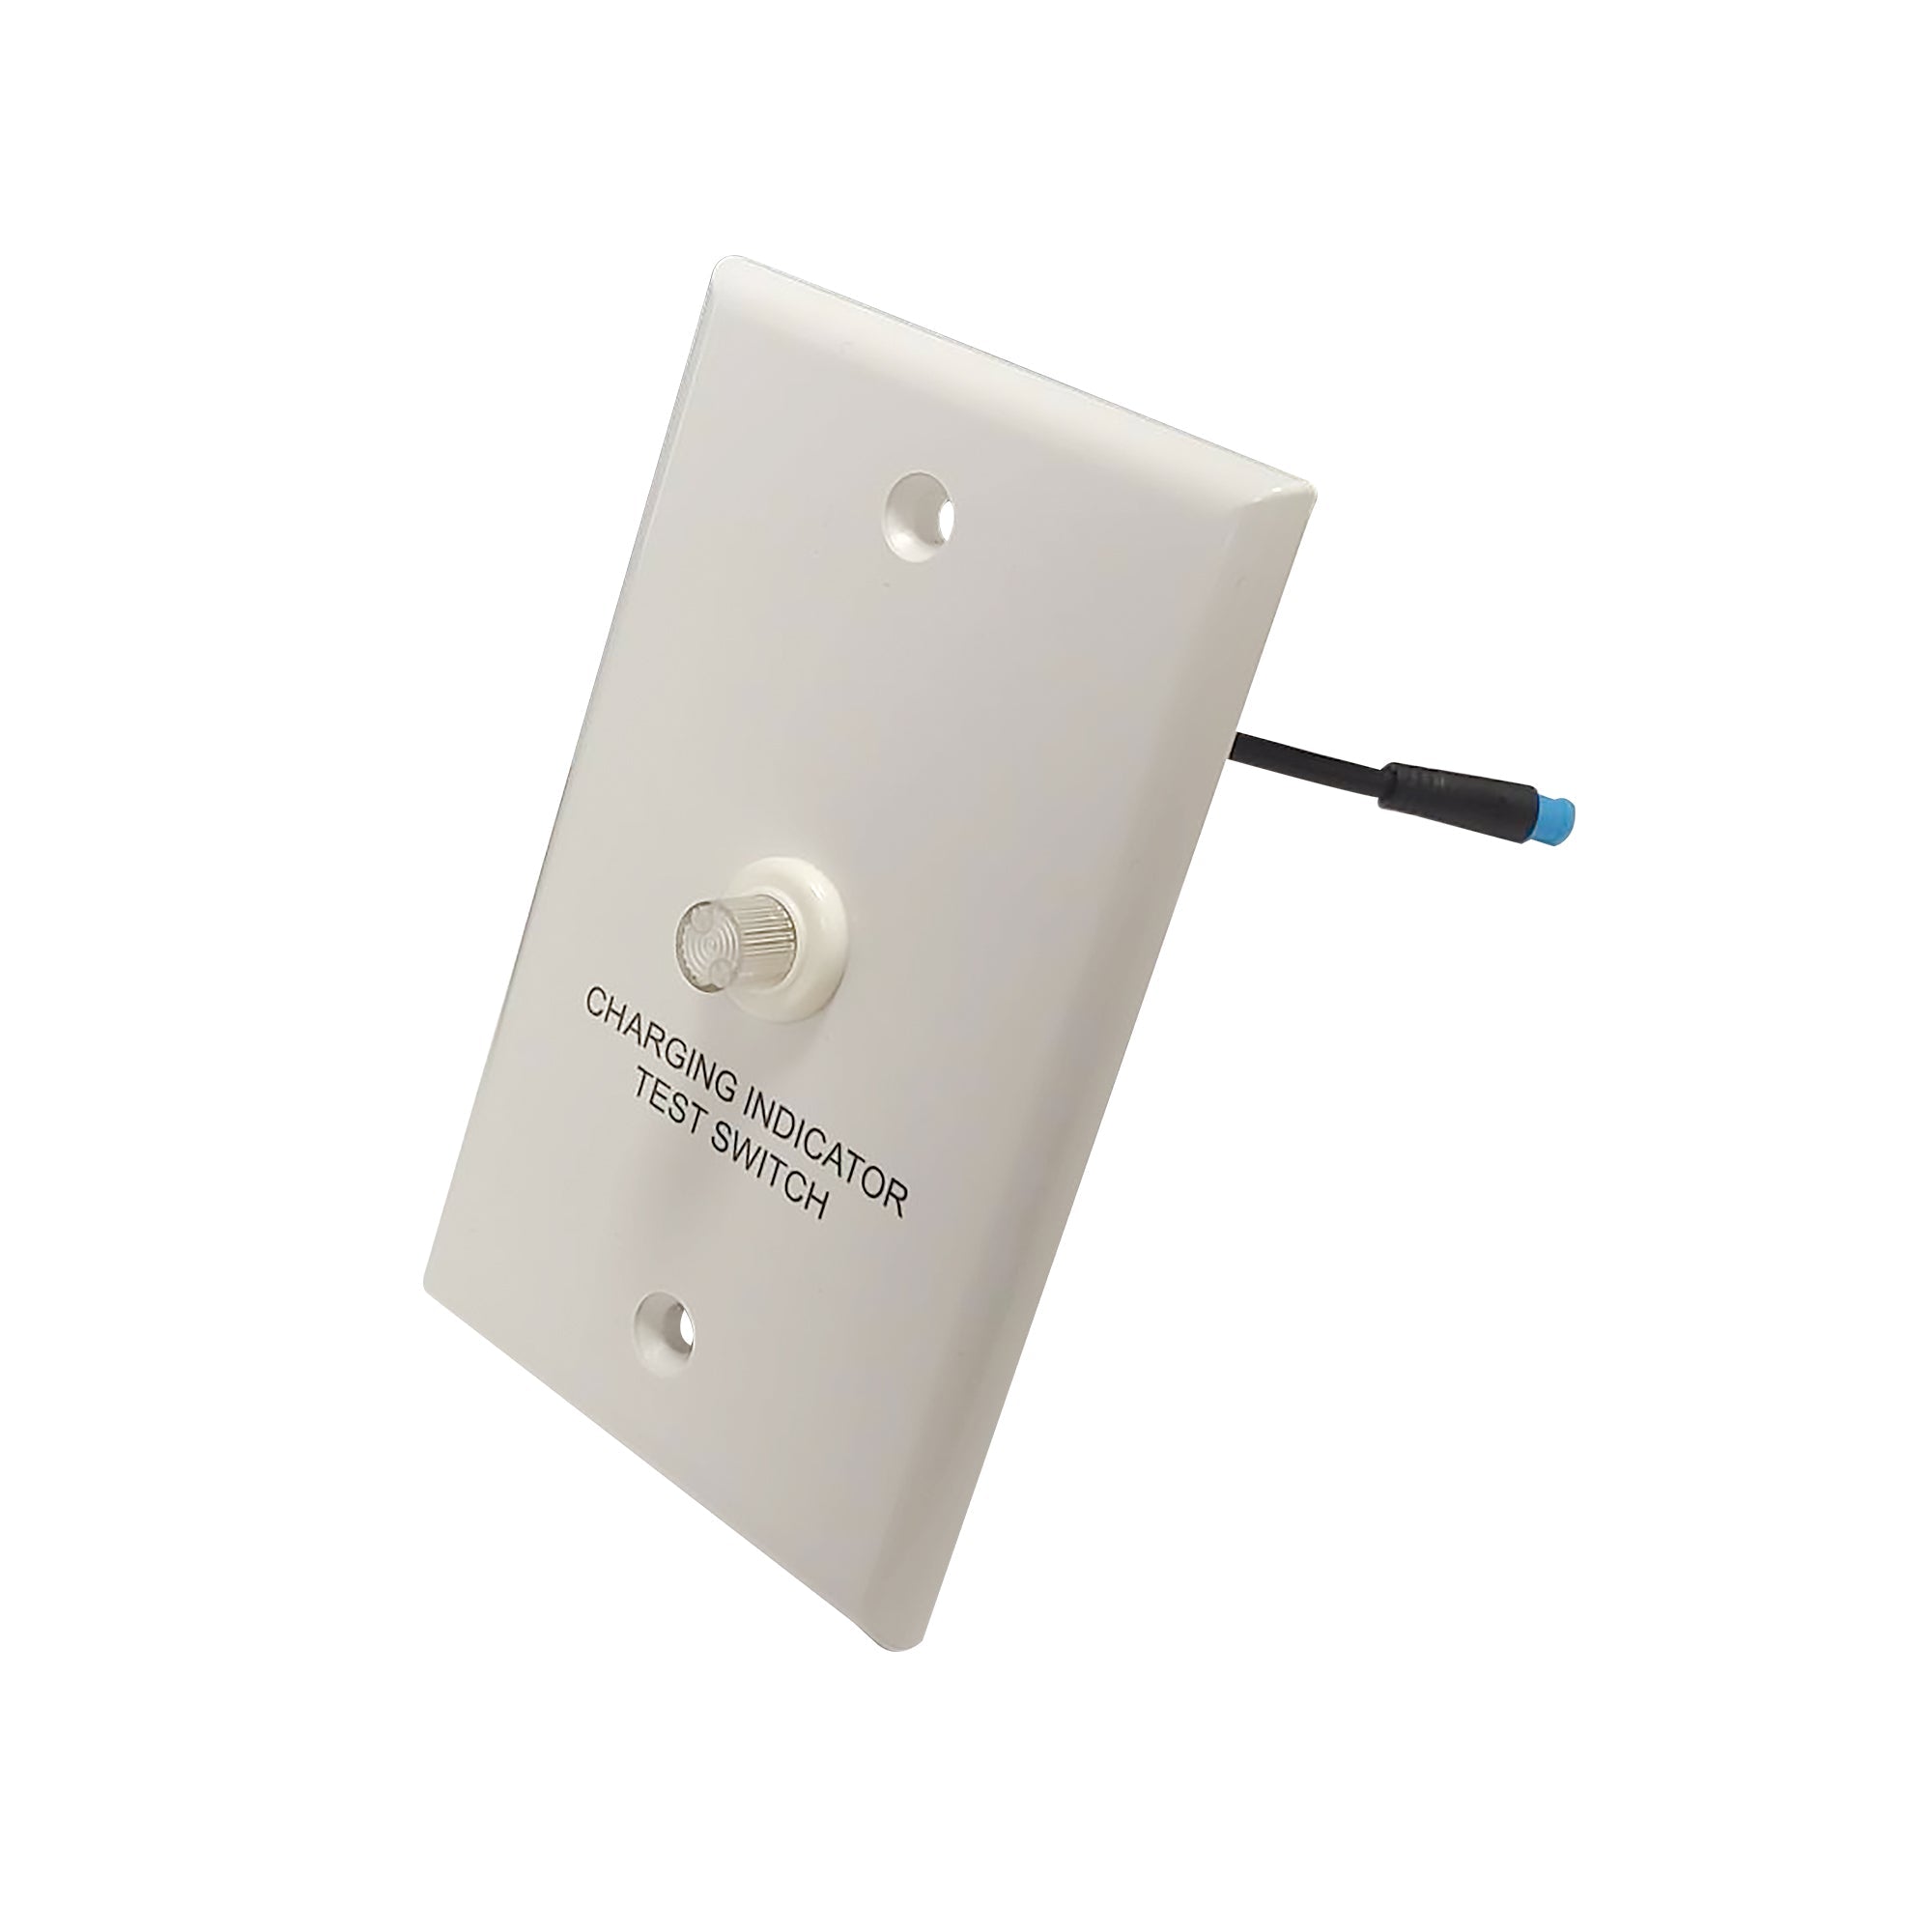 Nora Lighting NEPKA-20LEDFPTS - Exit / Emergency - Replacement Face Plate and Test Switch for NEPK-20LEDUNV